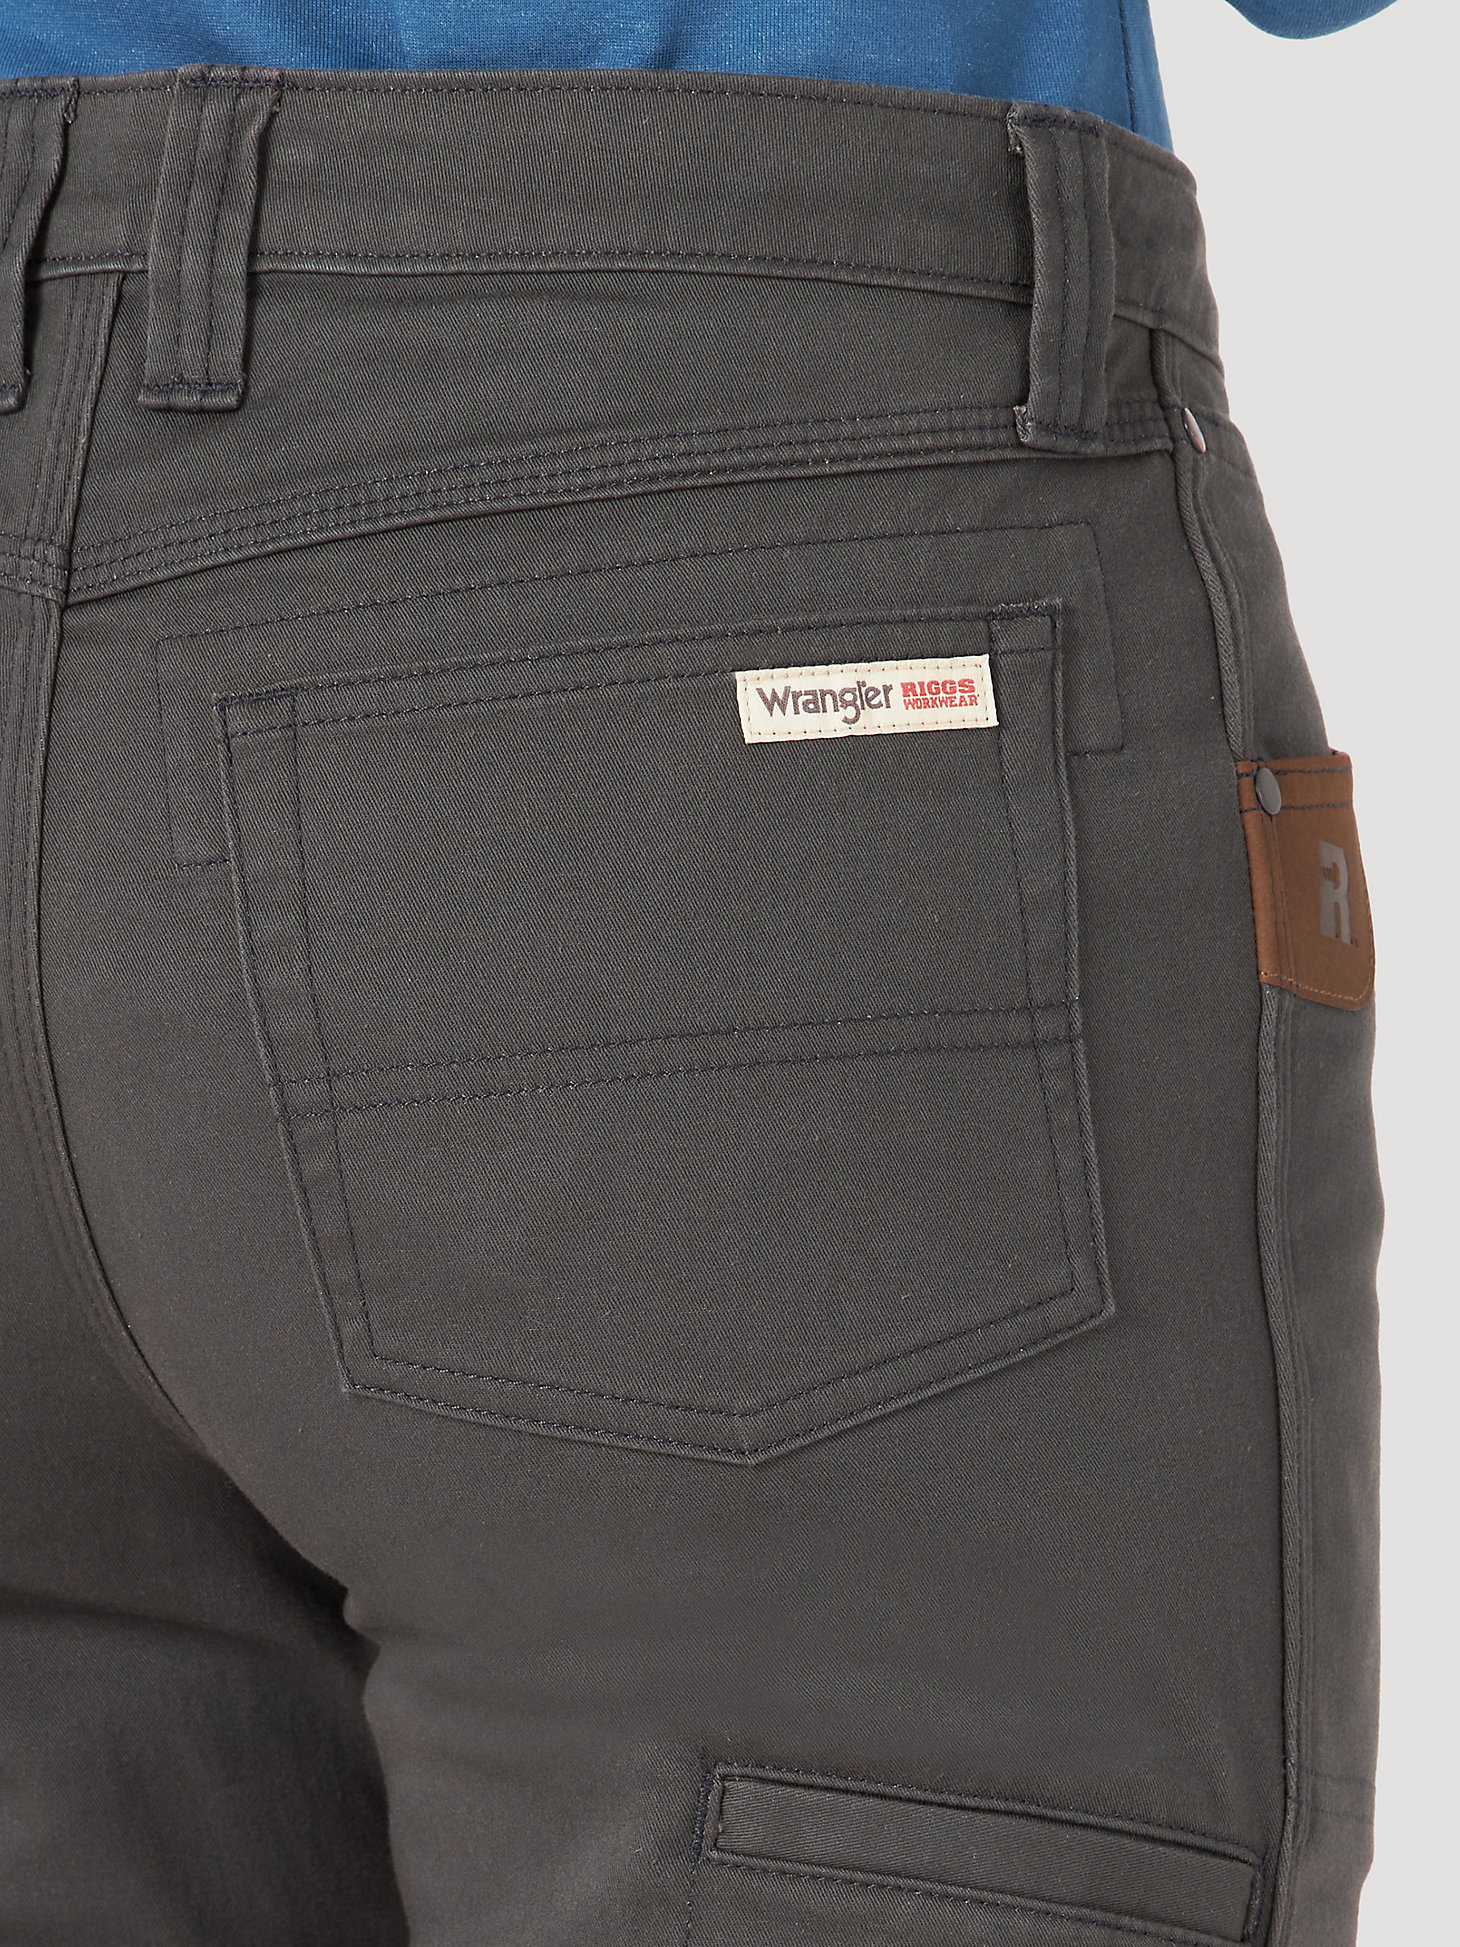 Women's Wrangler® RIGGS Workwear® Single Layer Insulated Work Pant in Grey alternative view 4